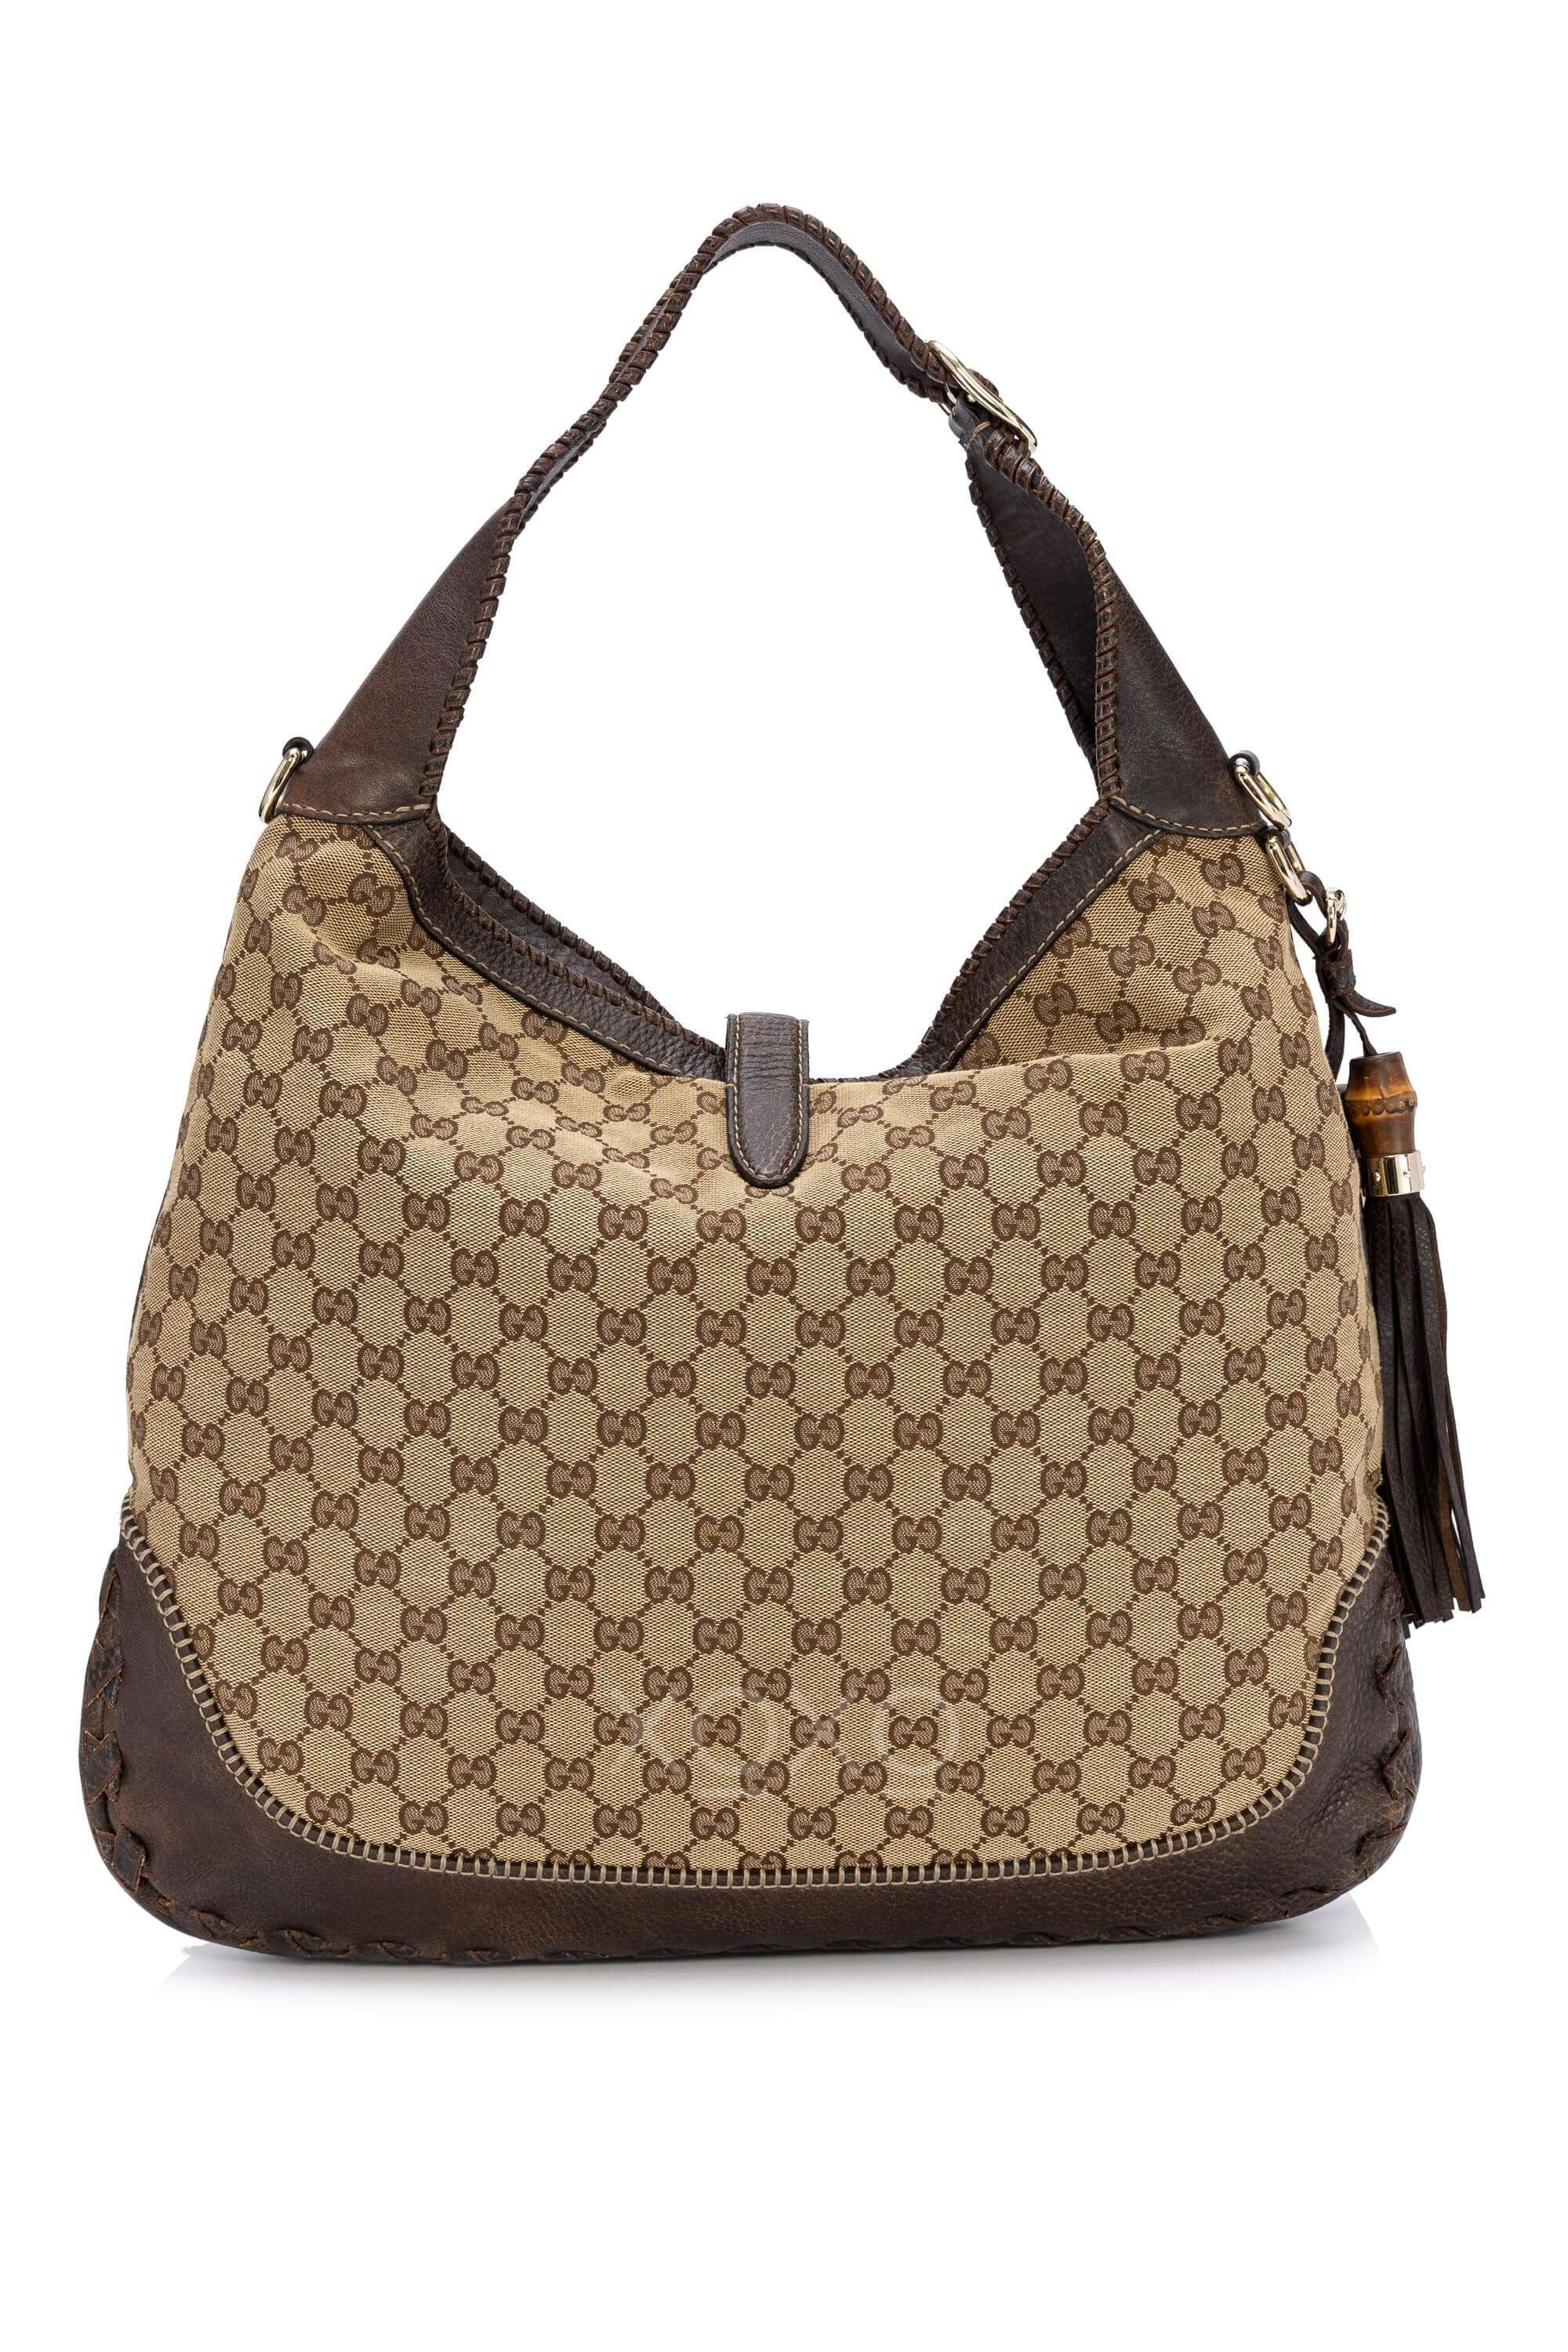 Gucci Vintage Large Jackie O Black Canvas and Brown Leather Hobo